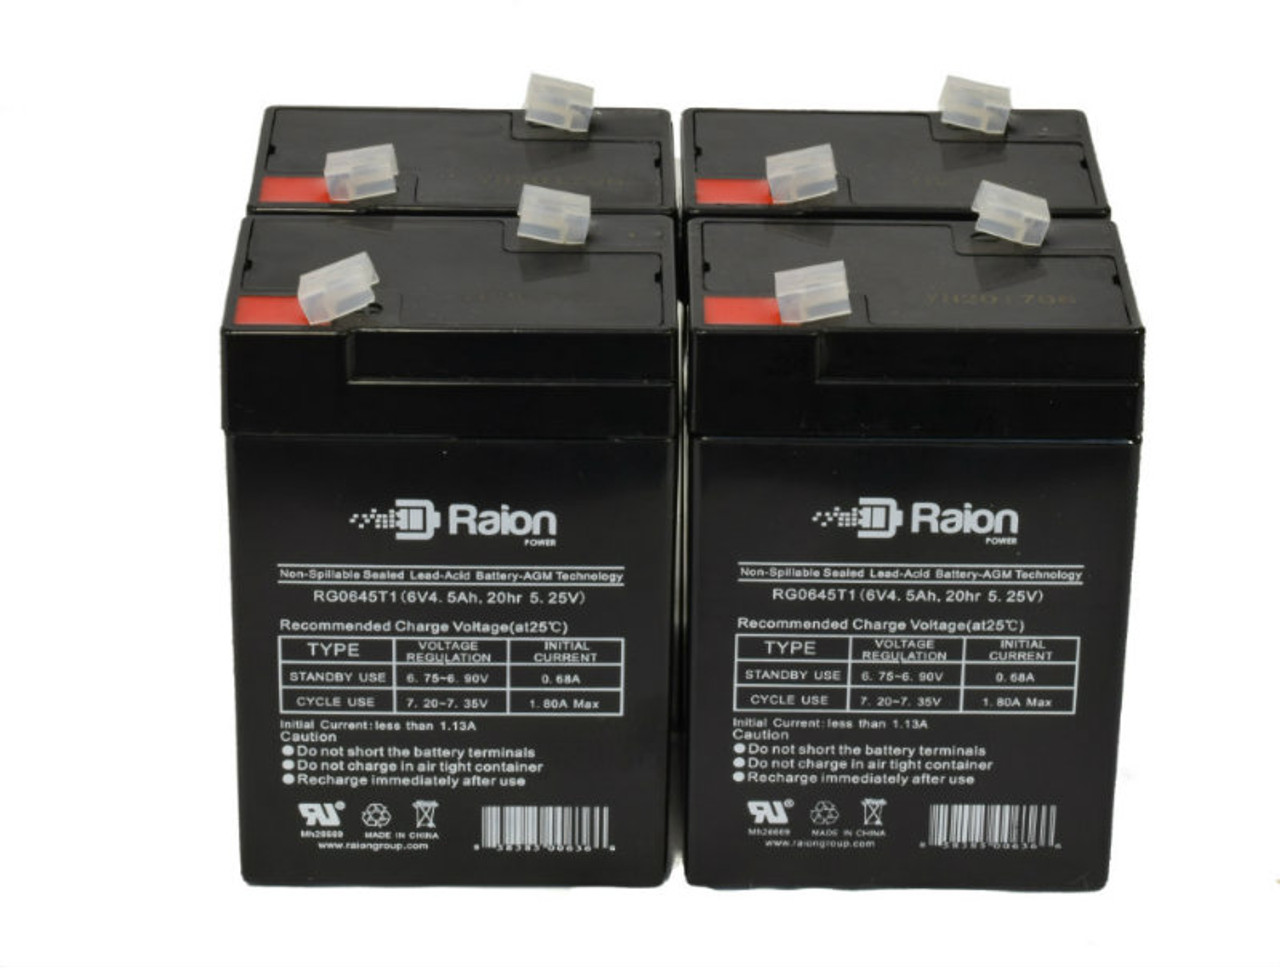 Raion Power 6V 4.5Ah Replacement Emergency Light Battery for Light Alarms E8W - 4 Pack